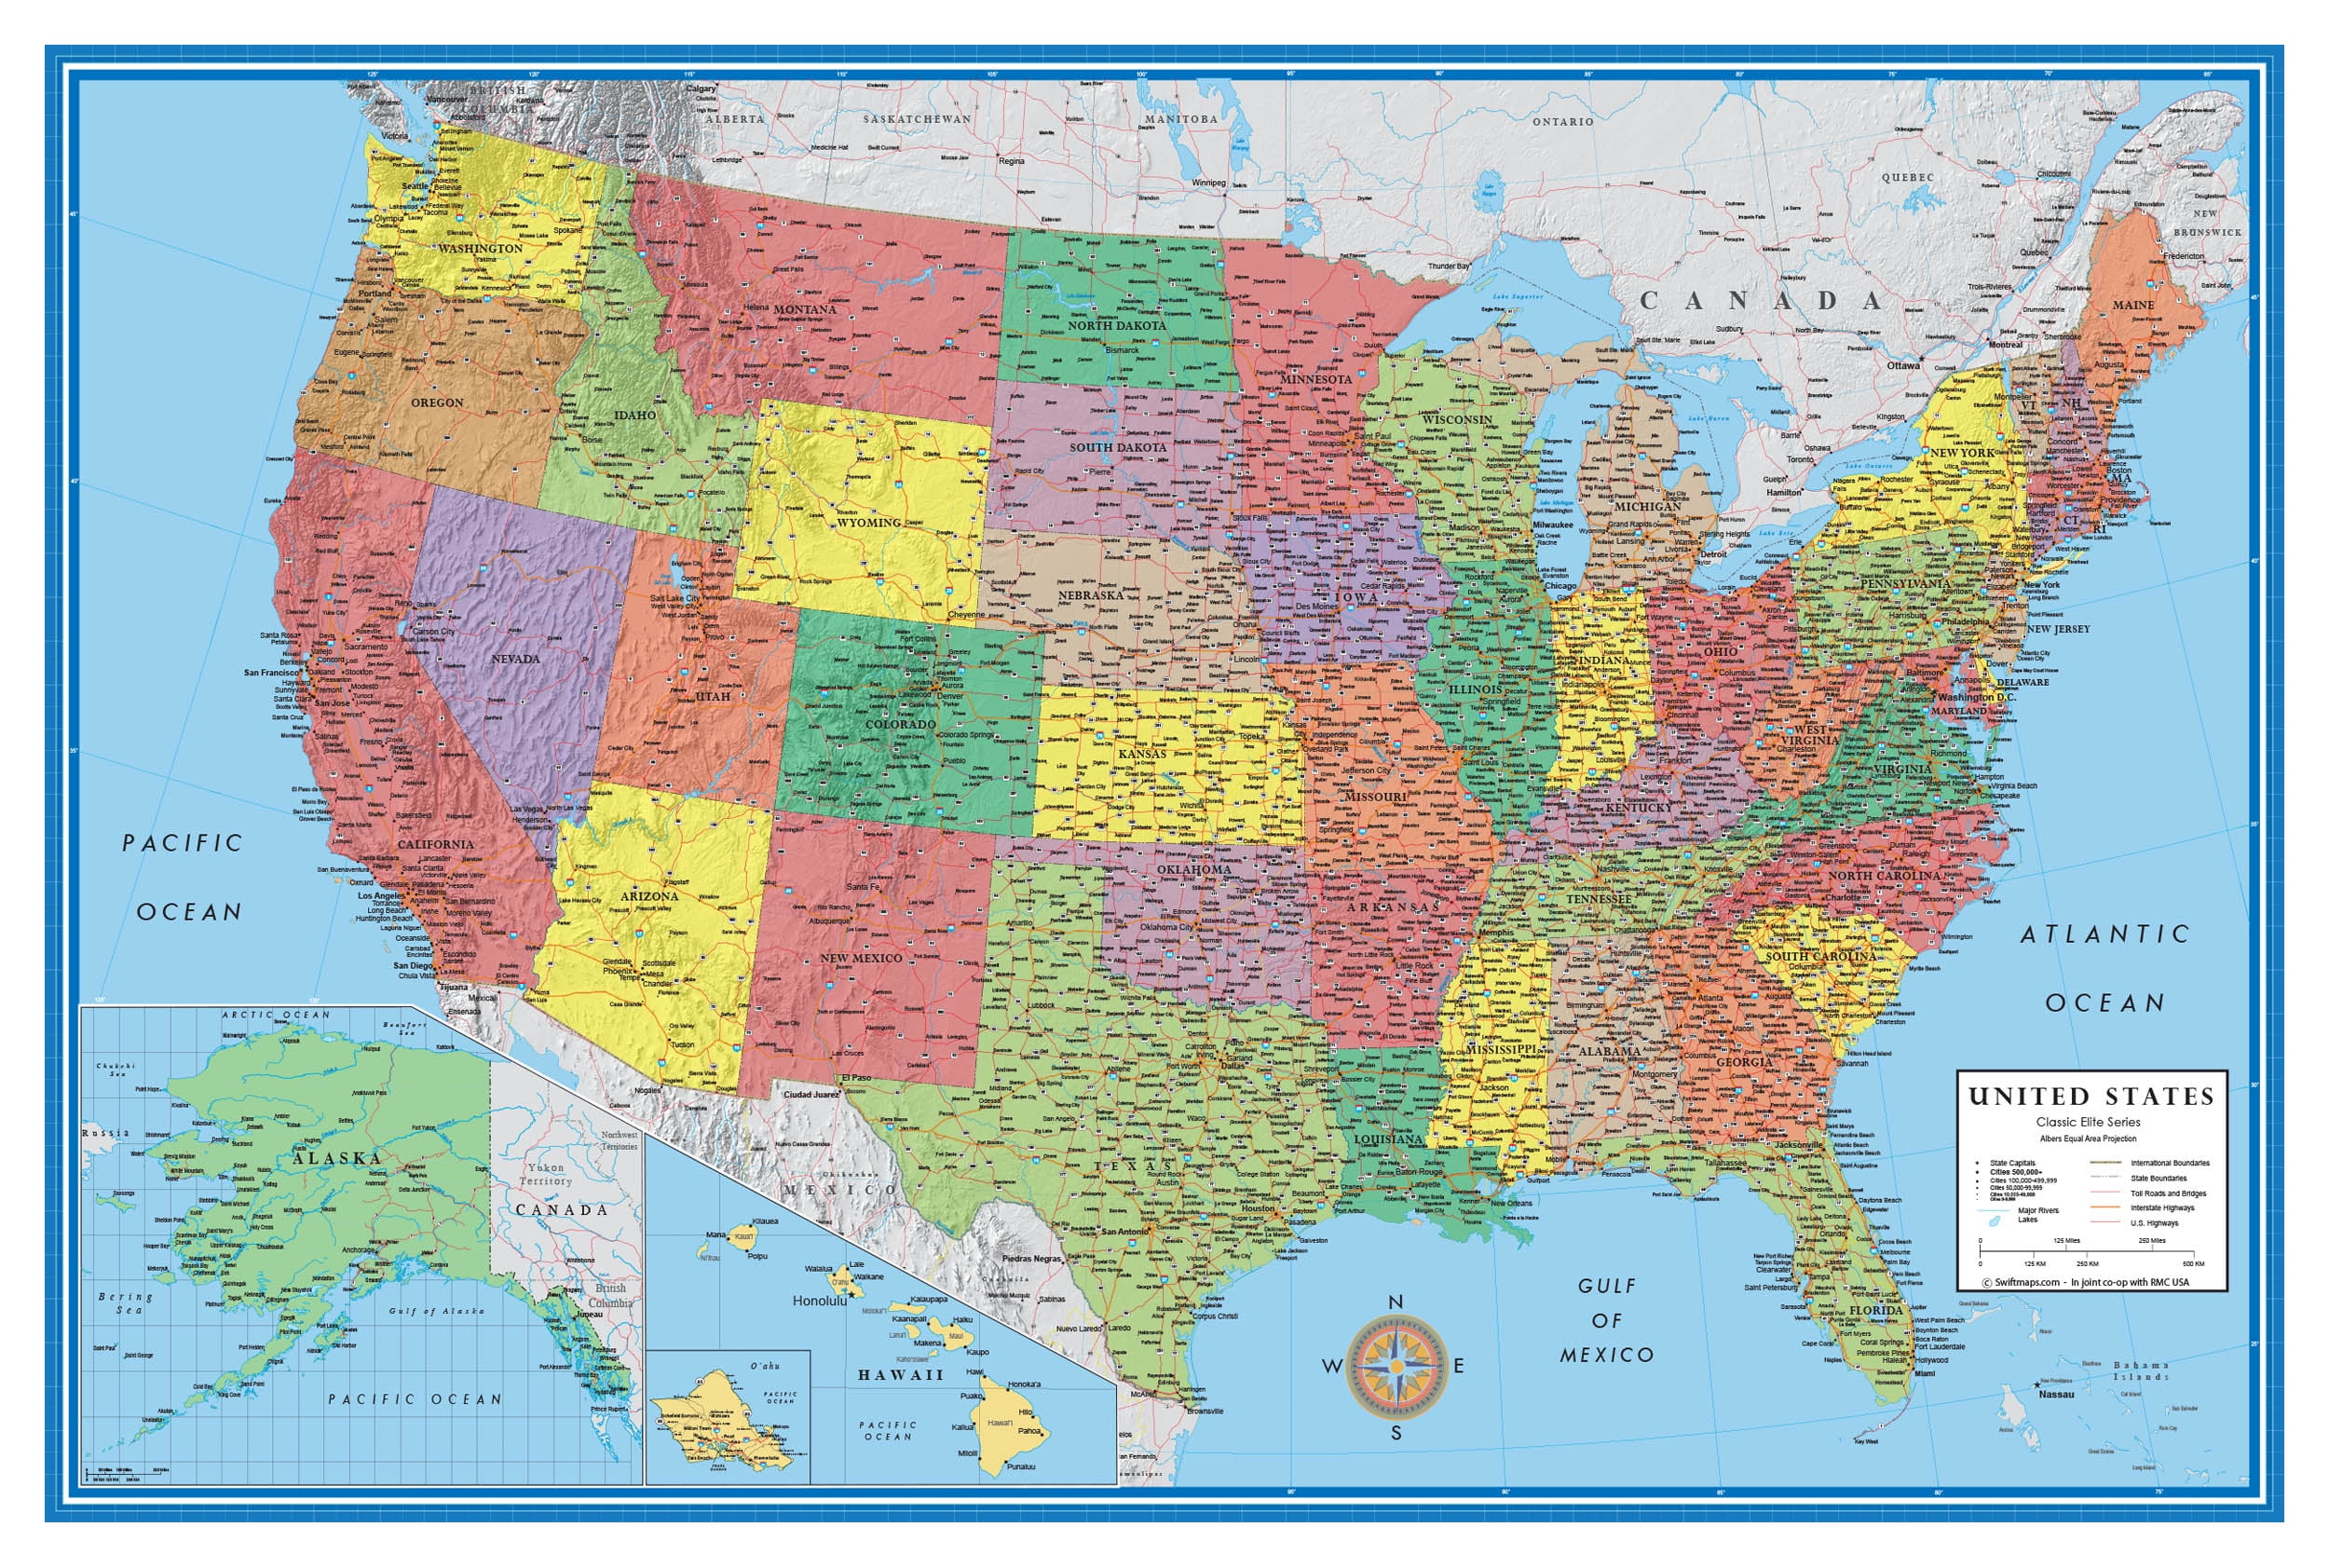 5-Map Pack 13" x 18" Laminated US and World Desk Map by American Geographics 